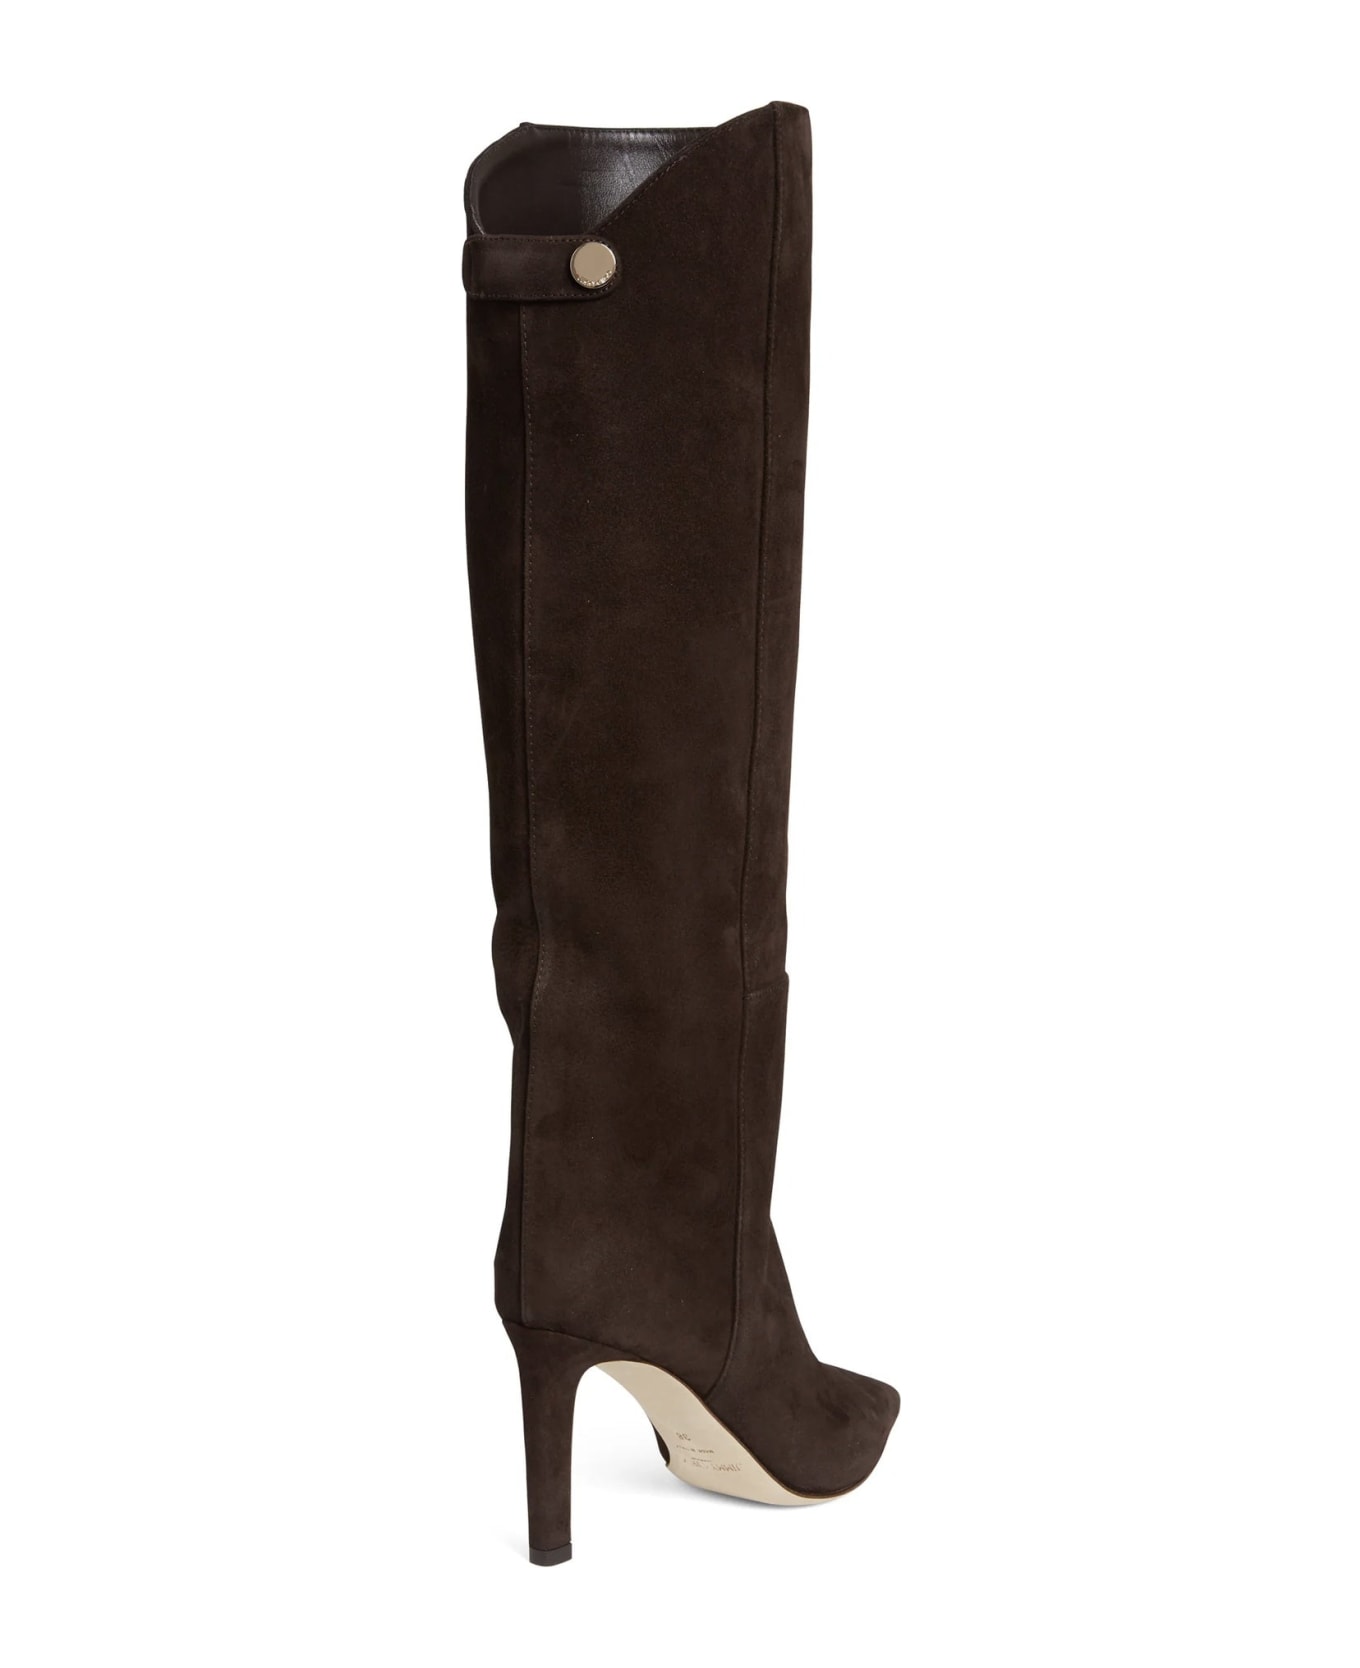 Jimmy Choo Alizze 85 Suede Boots - Brown